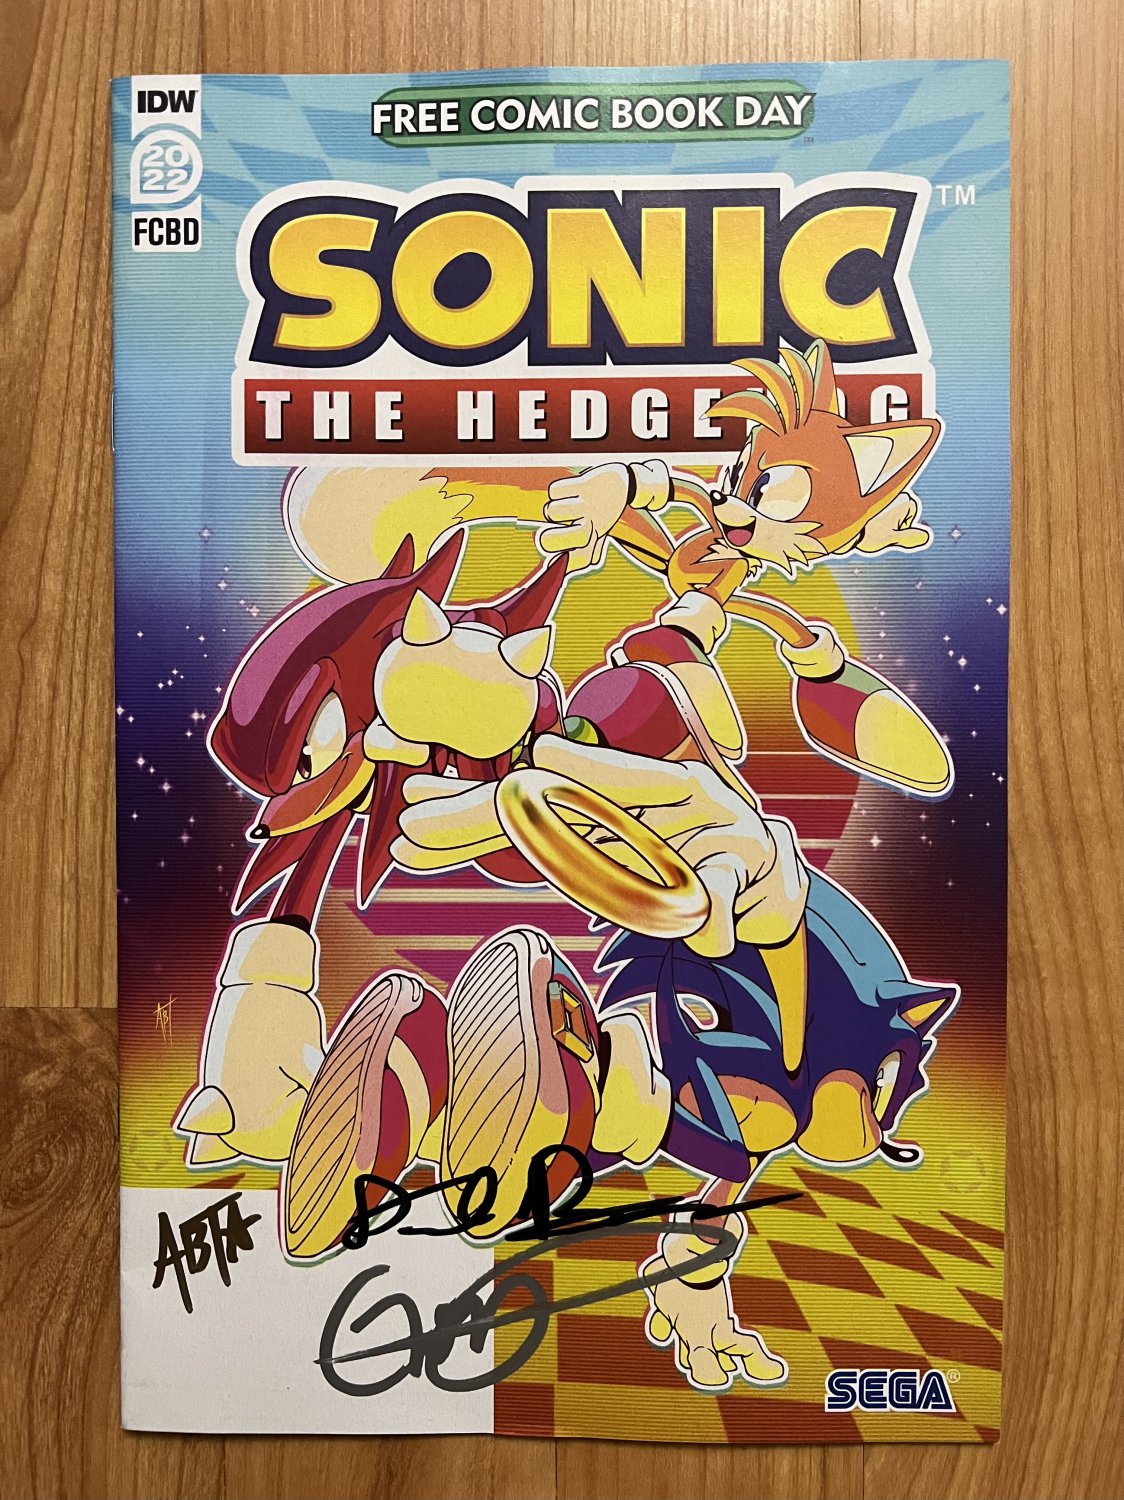 SDCC 2022 Sonic the Hedgehog signing comic book